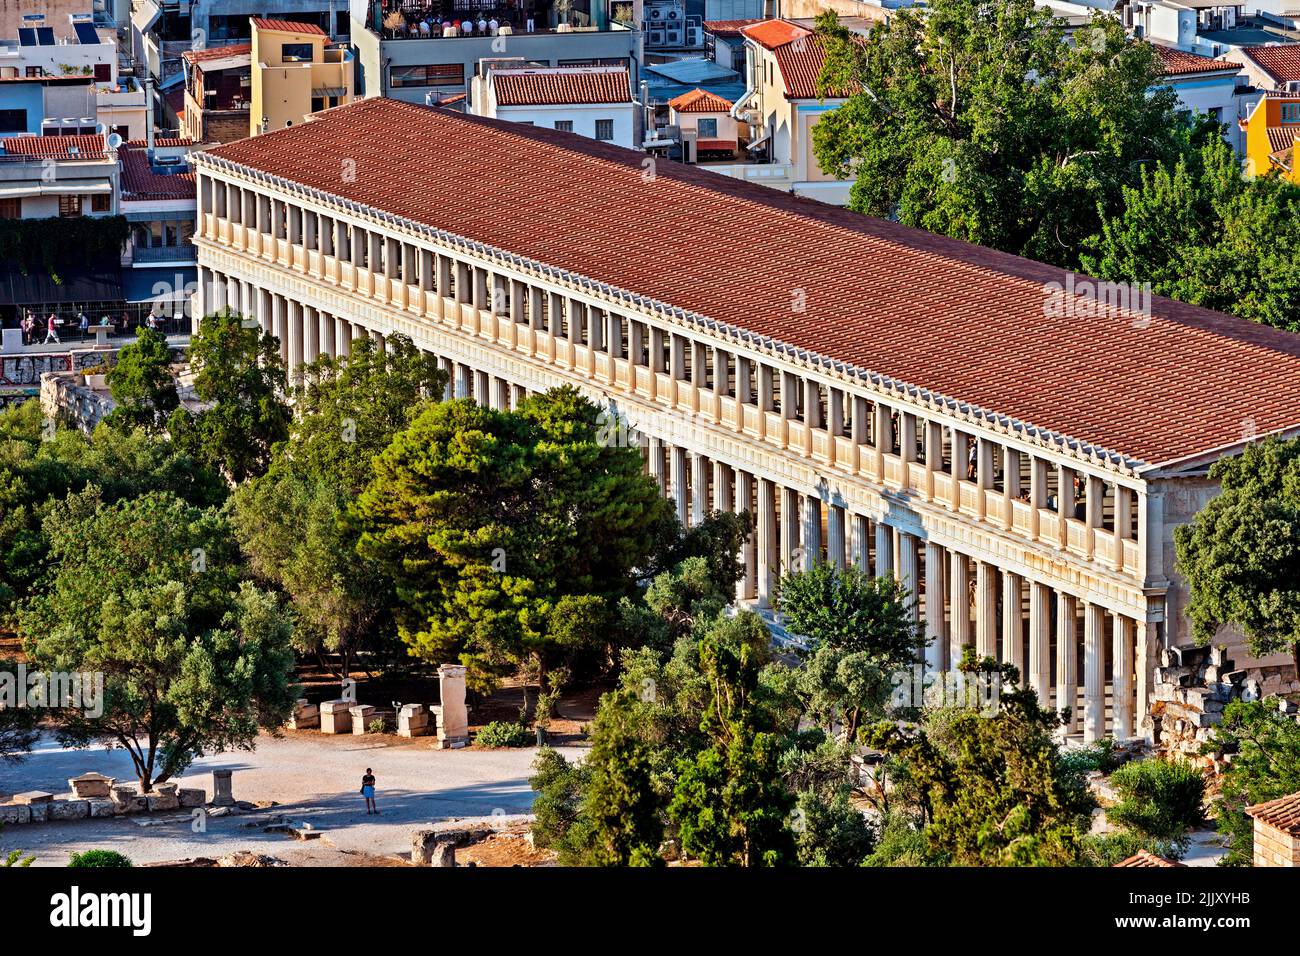 partial view of the Ancient Agora of Athens, with the 'focus' on the Stoa ('gallery') of Attalos. Greece. Stock Photo